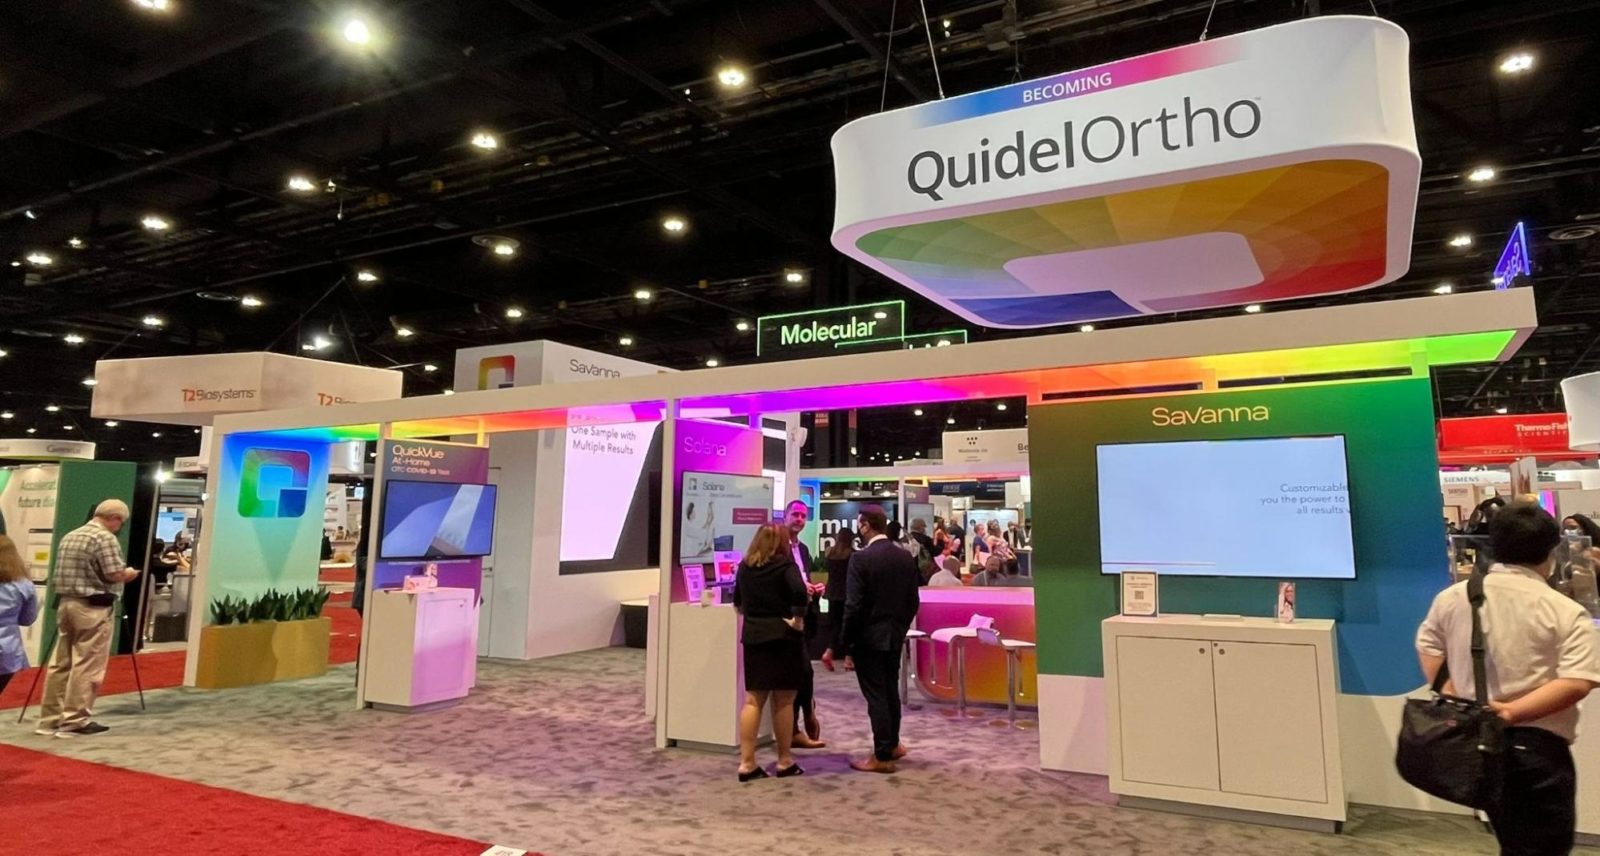 QuidelOrtho's colorful booth at AACC 2022